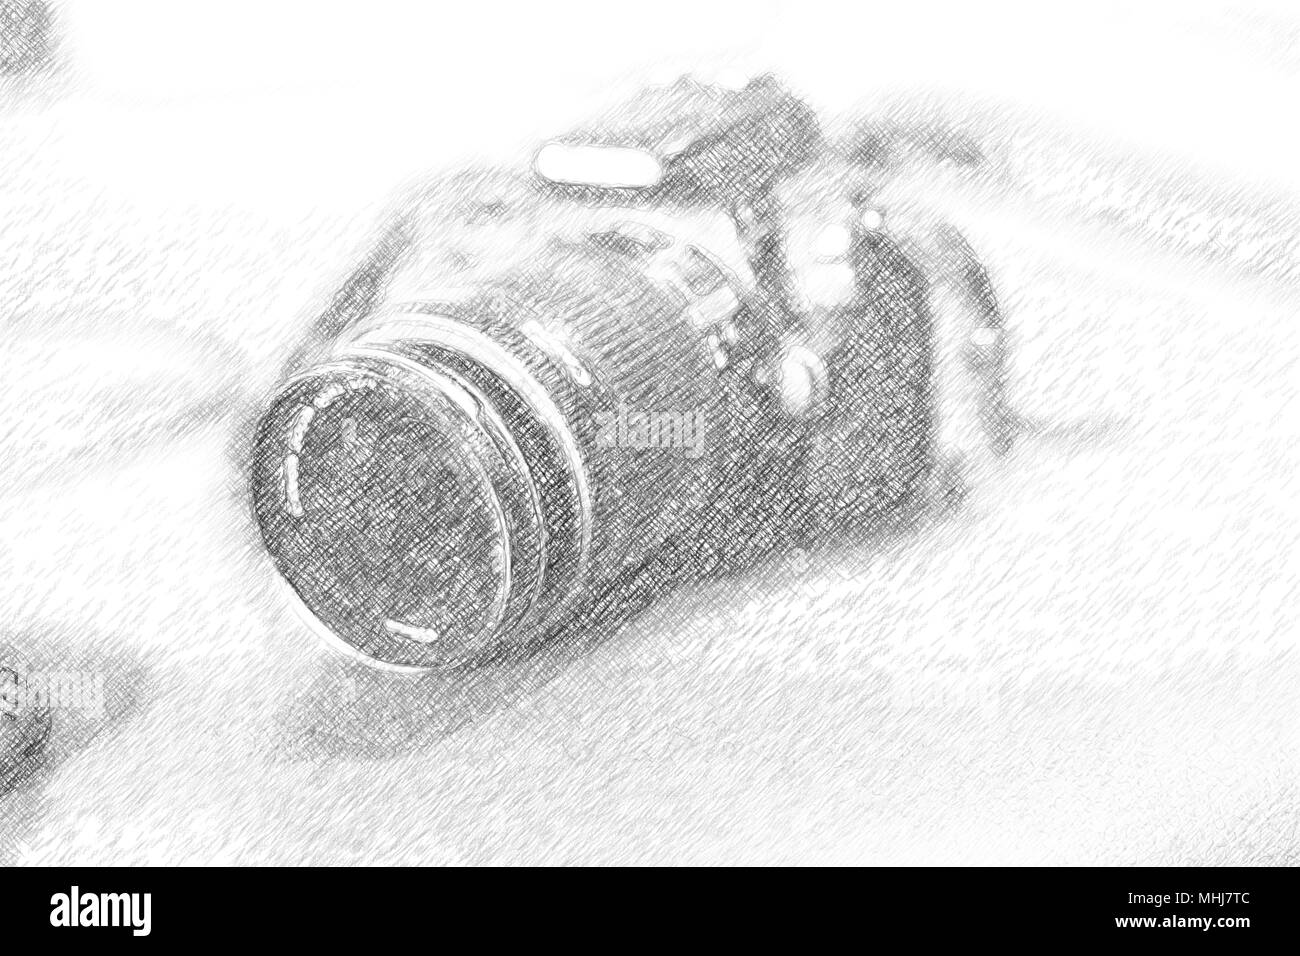 Pencil drawing of Man with Camera taking photo in portrait or vertical  Format Stock Photo  Alamy